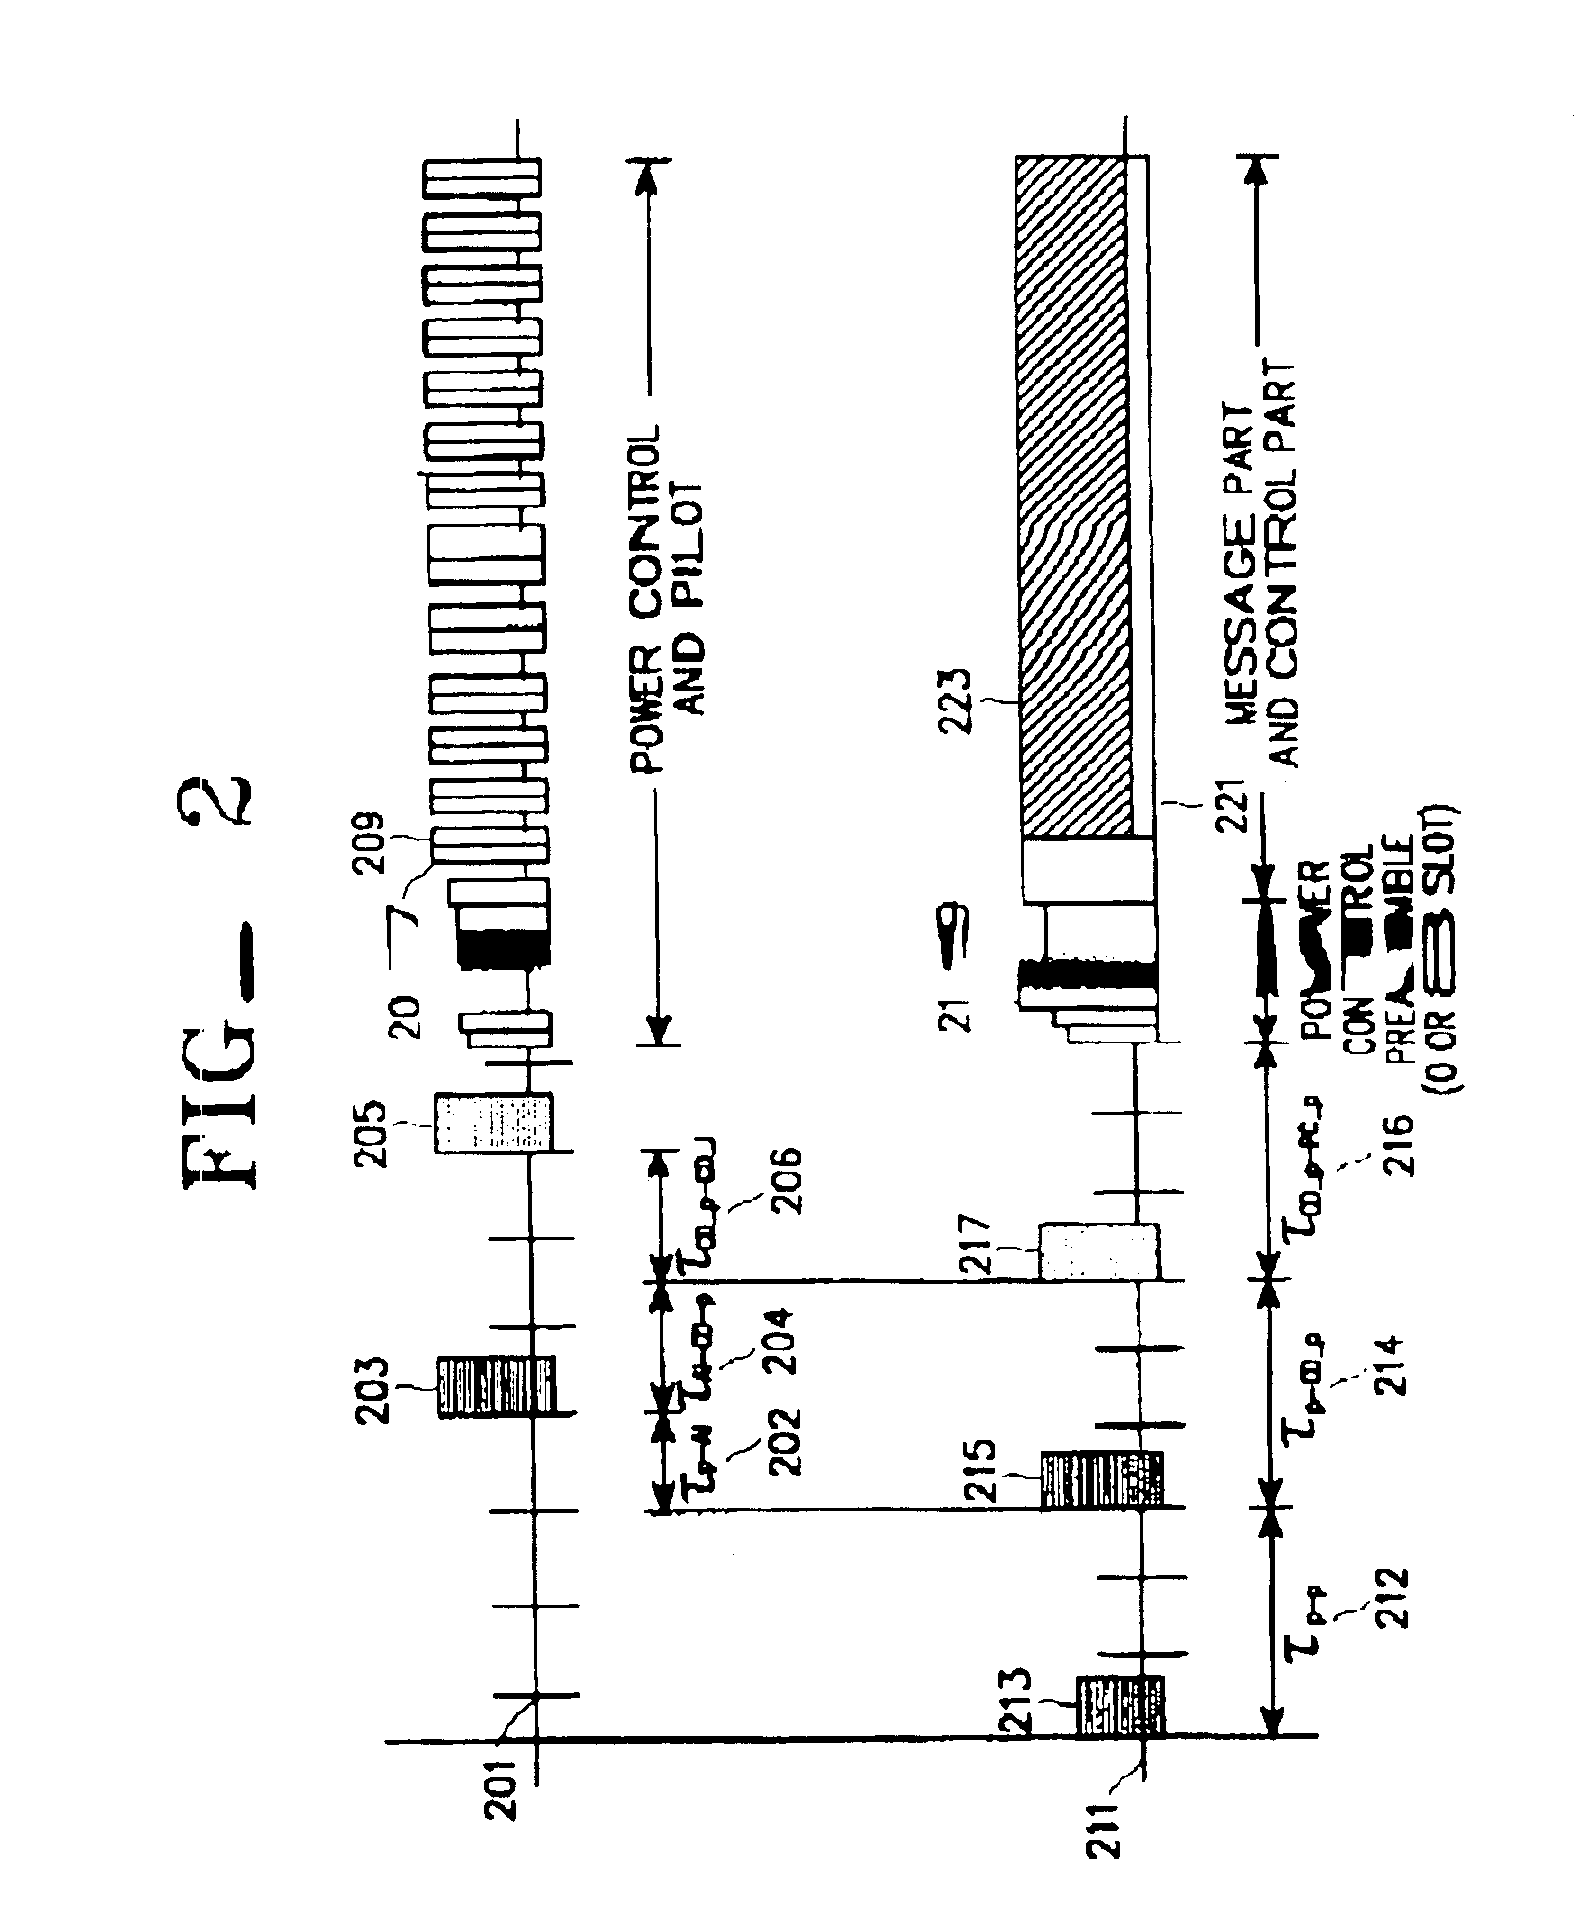 Apparatus and method for assigning a common packet channel in a CDMA communication system